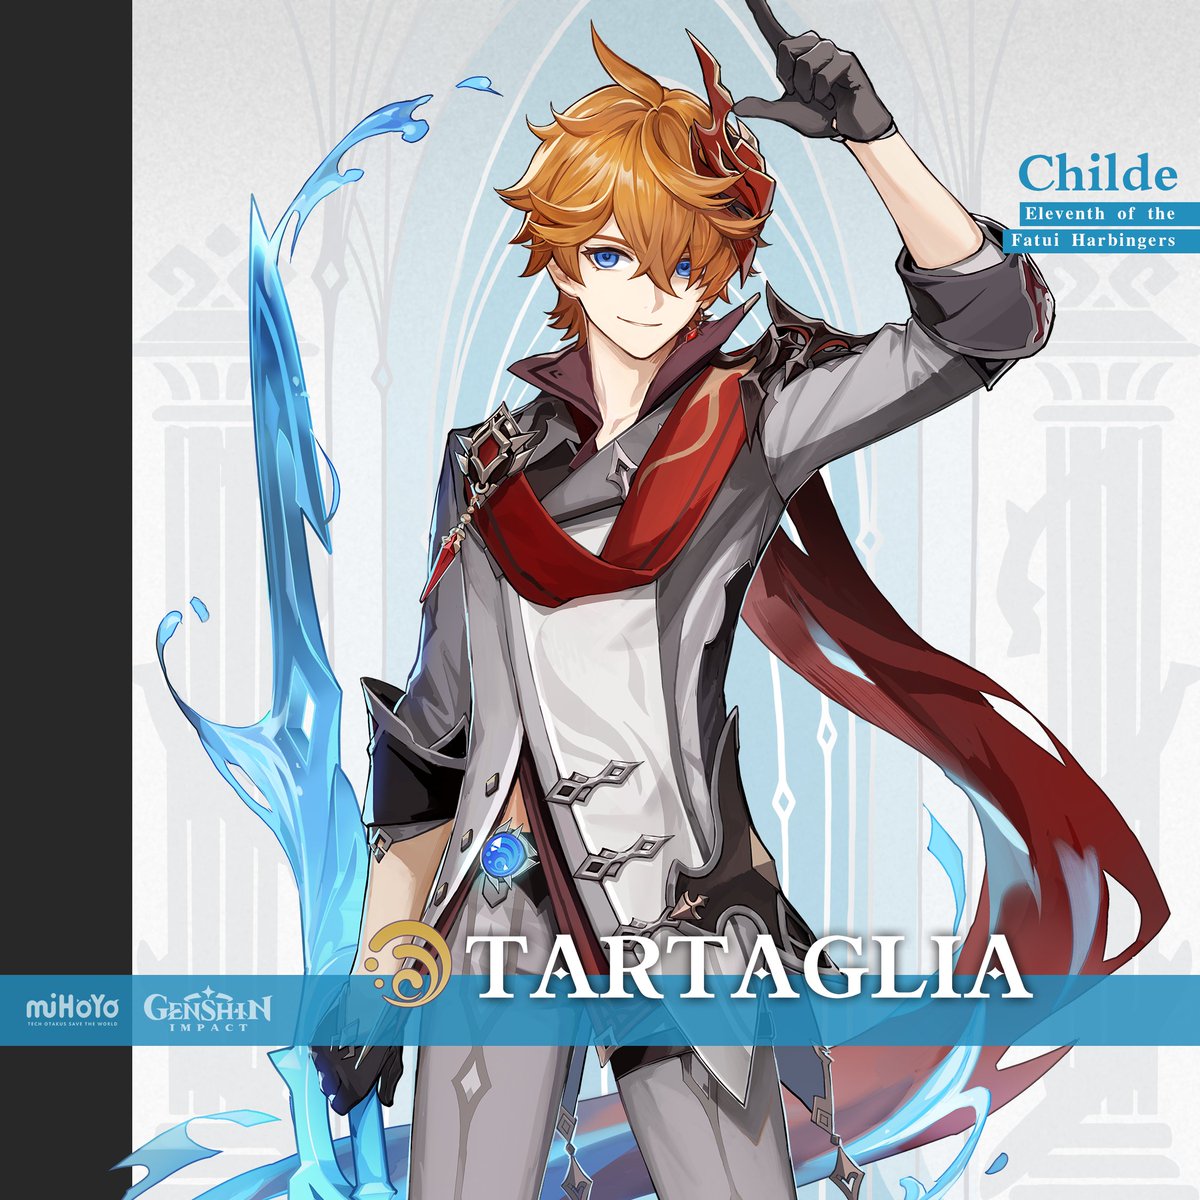 Tartaglia ‧ Childe
Eleventh of the Fatui Harbingers

His name is Tartaglia, and he is devoted to the thrill and the physical feel of battle.

#GenshinImpact #Tartaglia